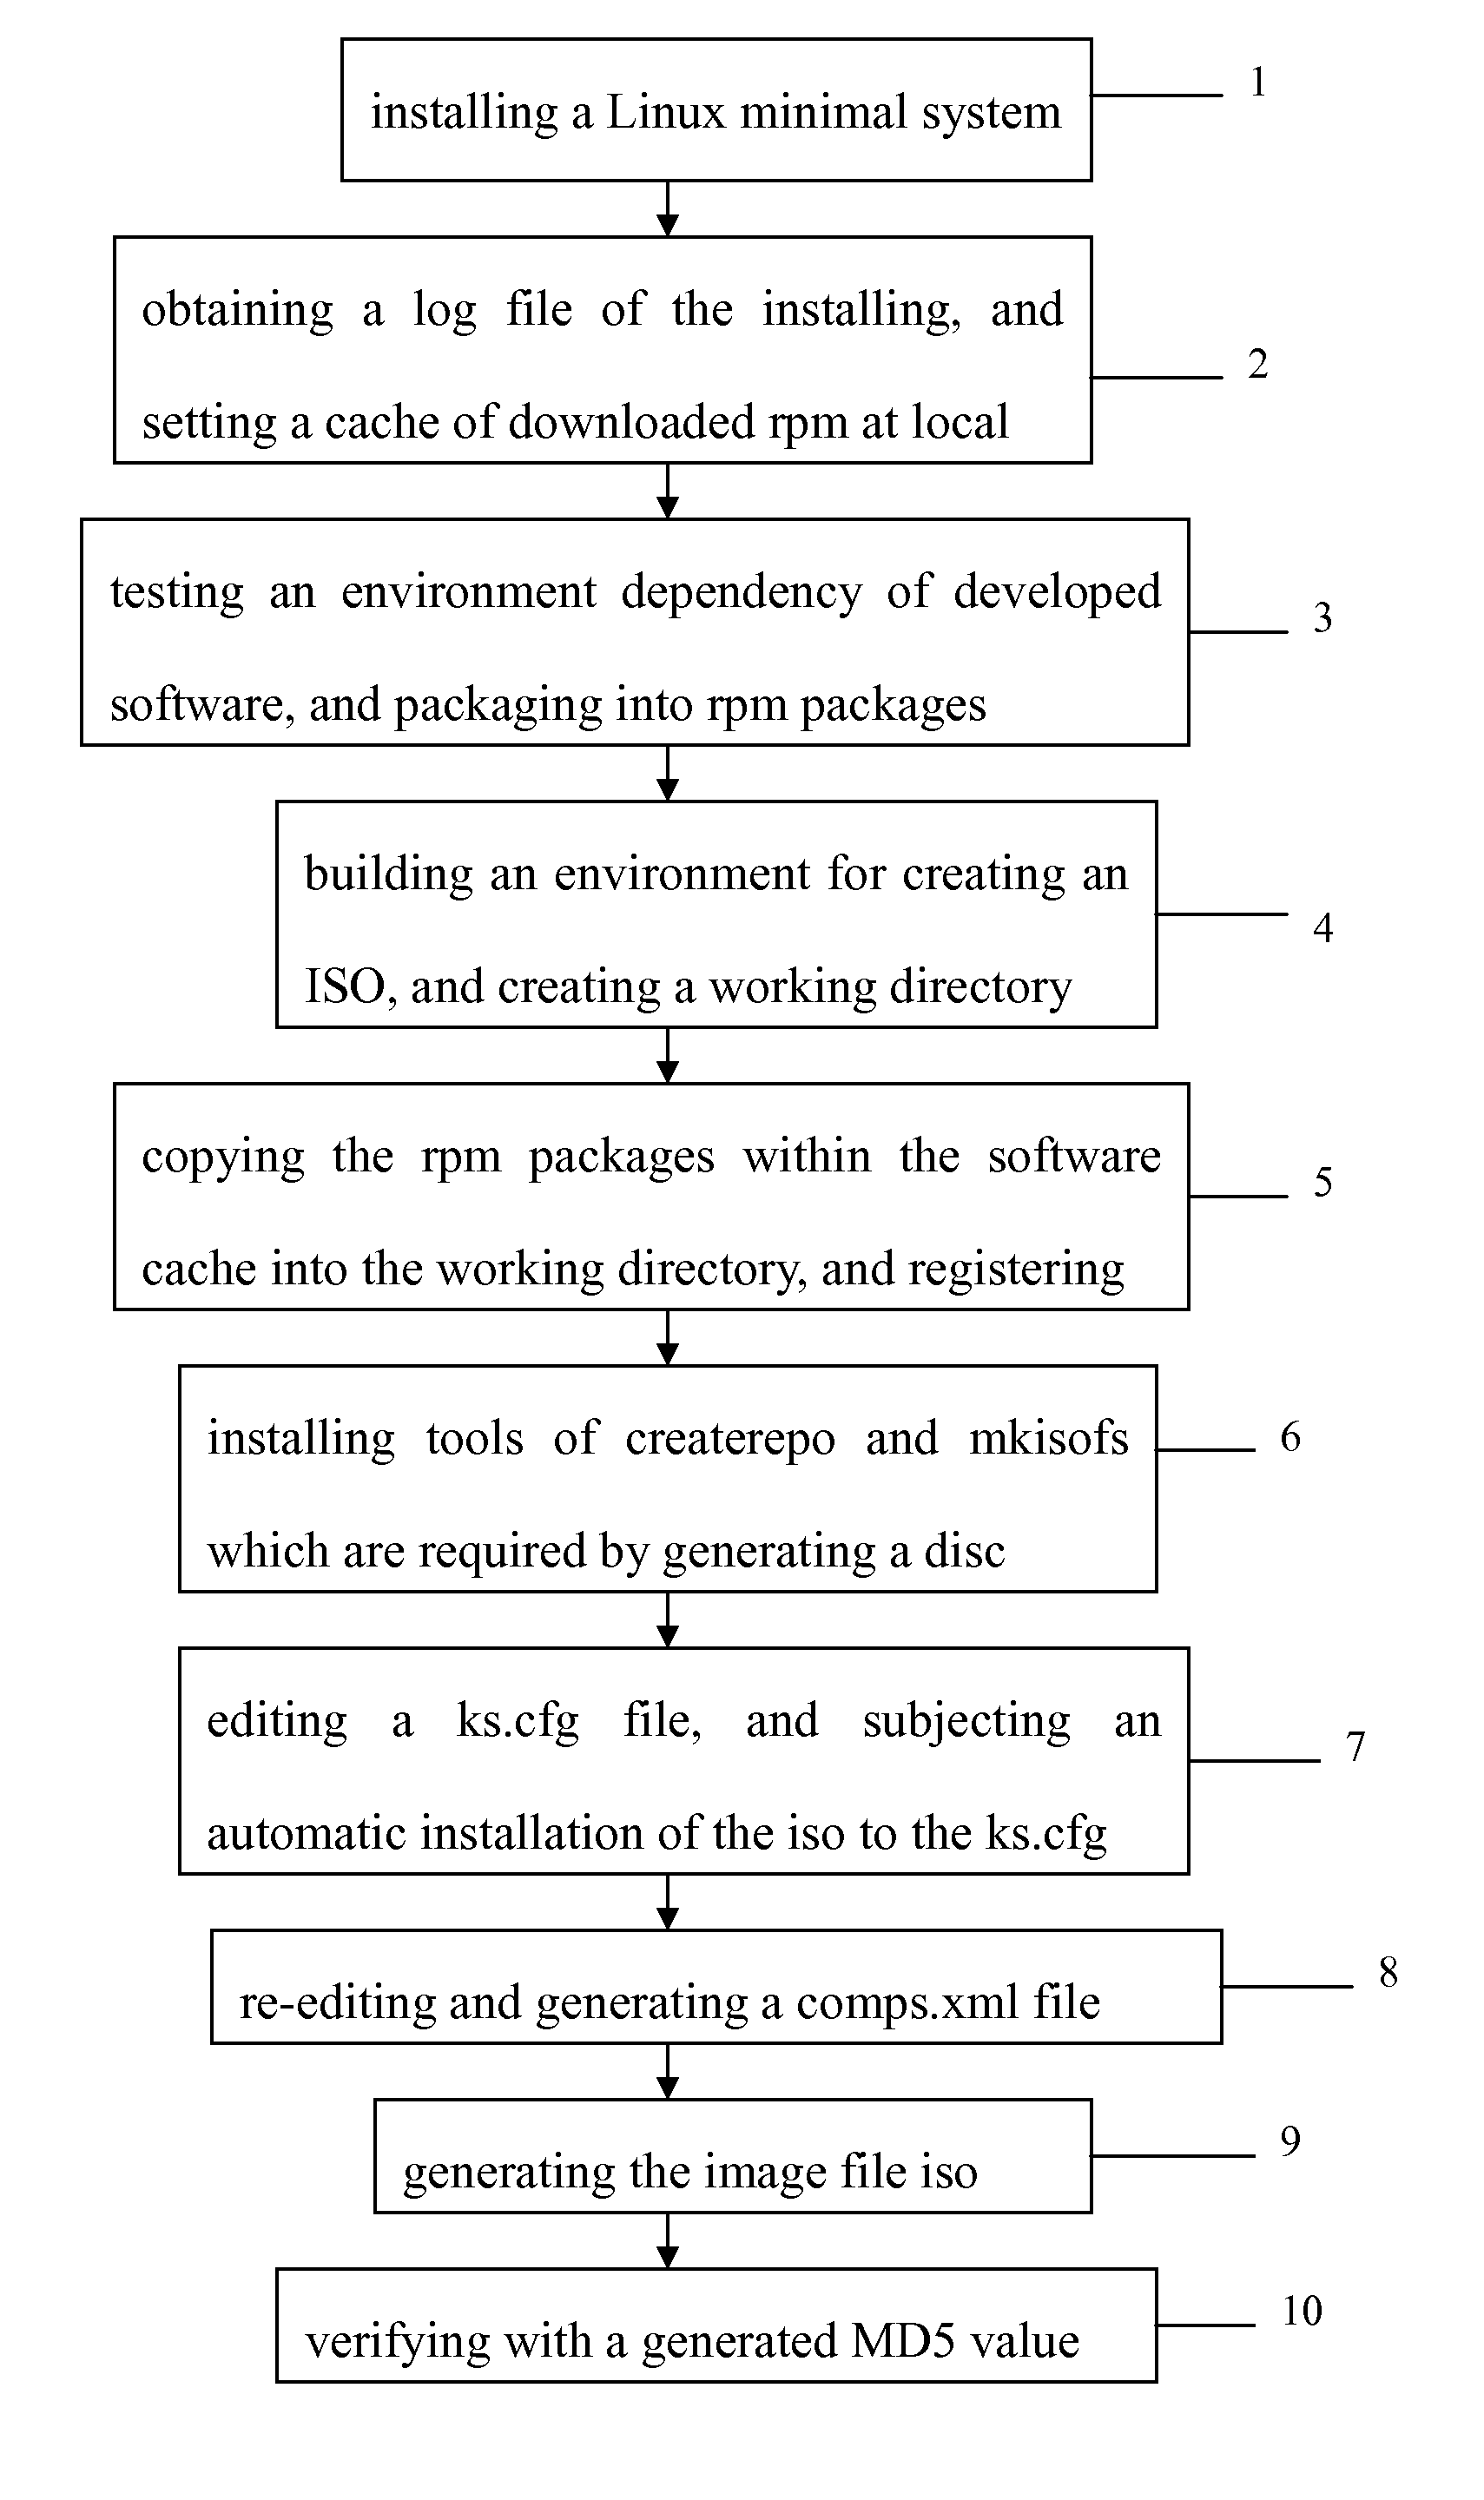 Method for distributing large-sized Linux software packages